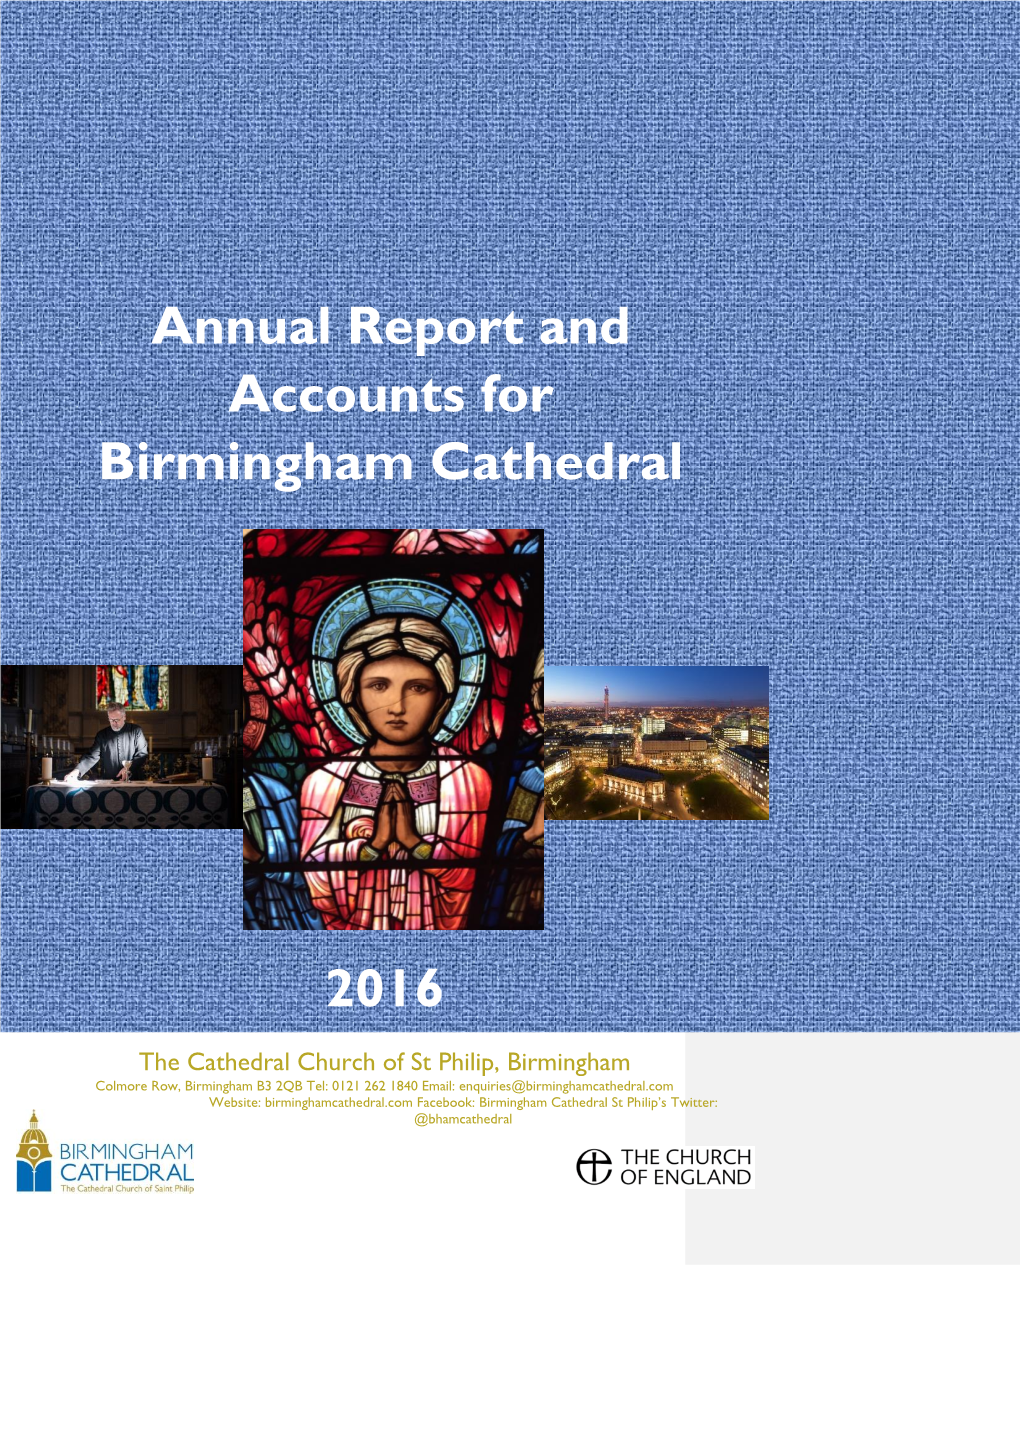 Annual Report and Accounts for Birmingham Cathedral 2016